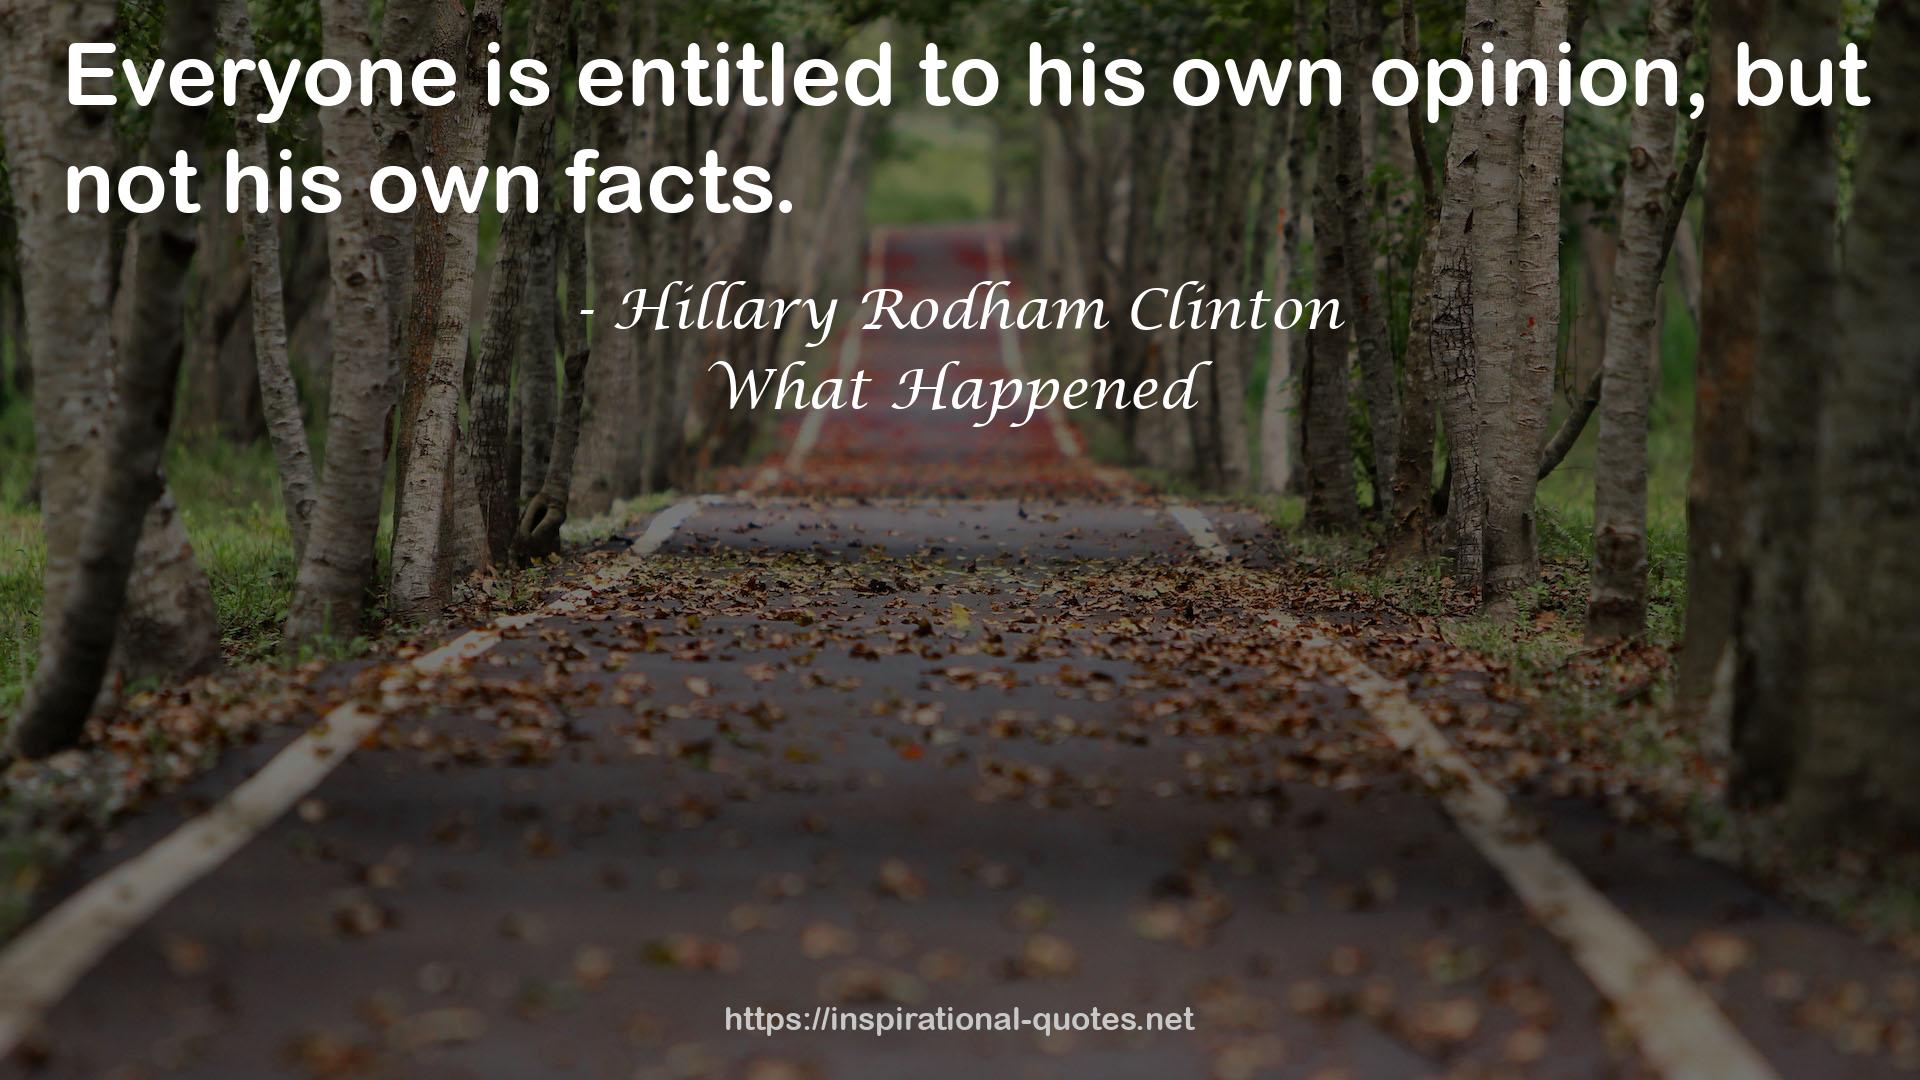 What Happened QUOTES